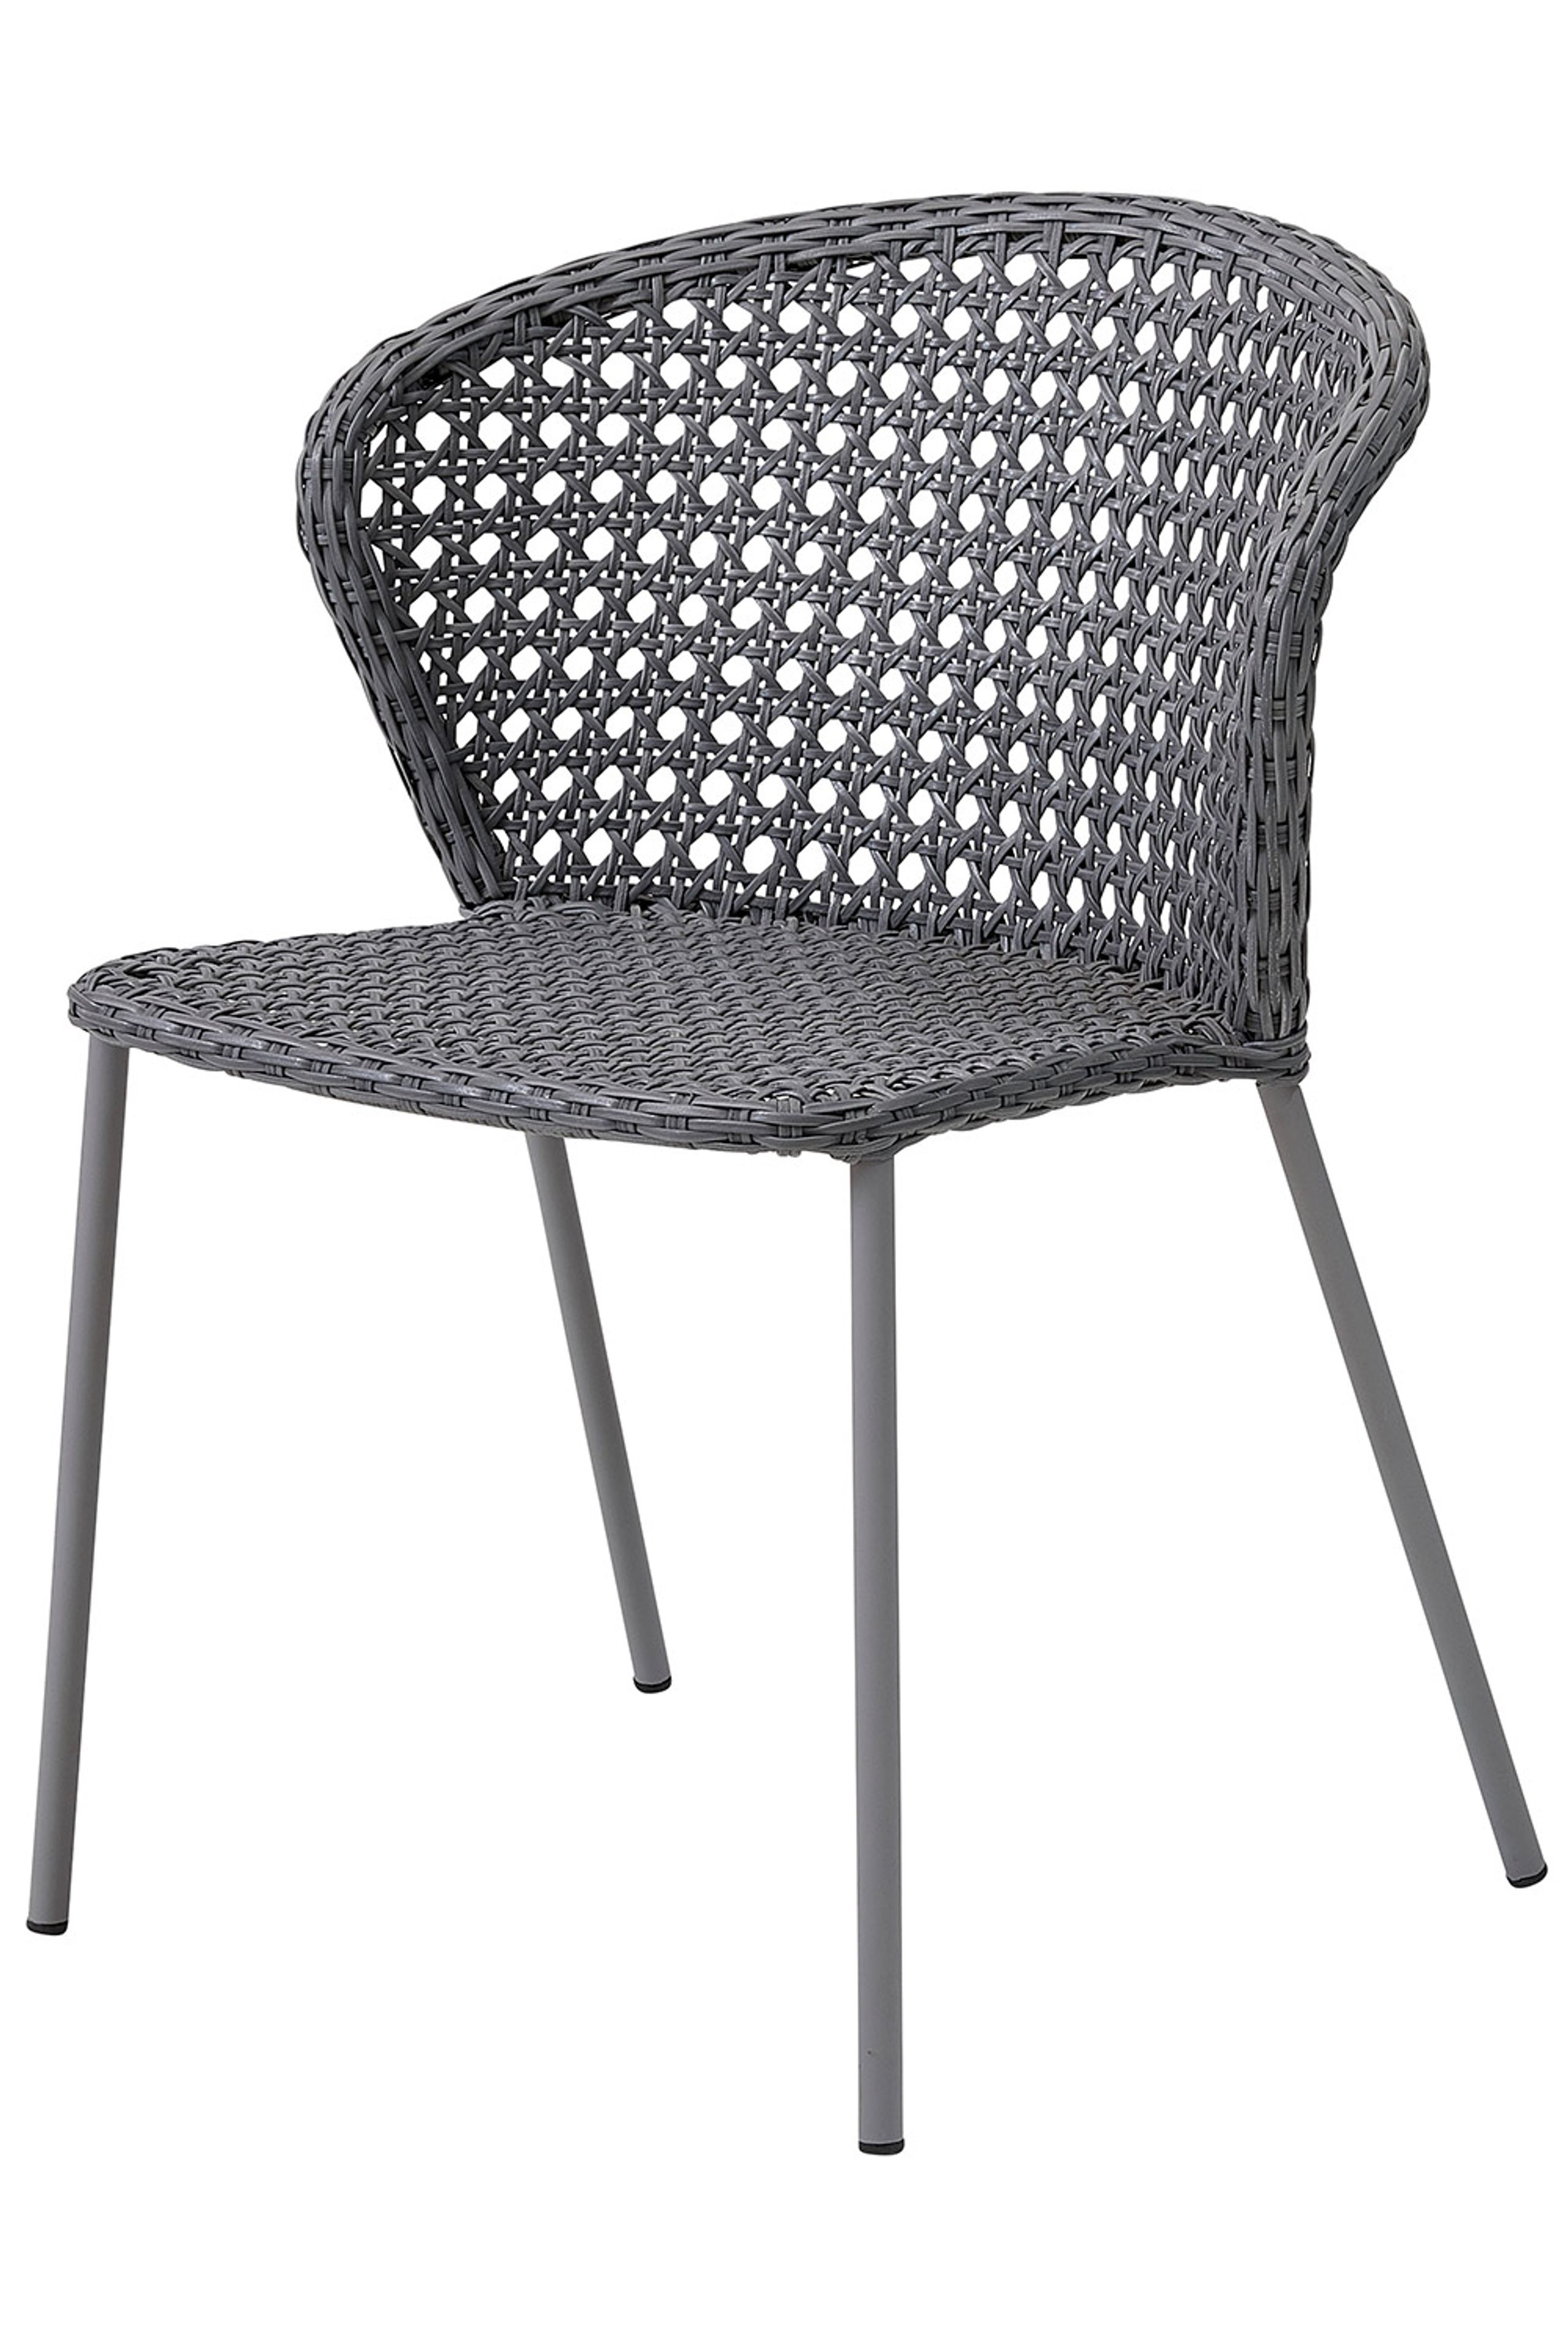 Cane-line - Chaise - Lean Chair - Chair - Light Grey - Cane-line French Weave